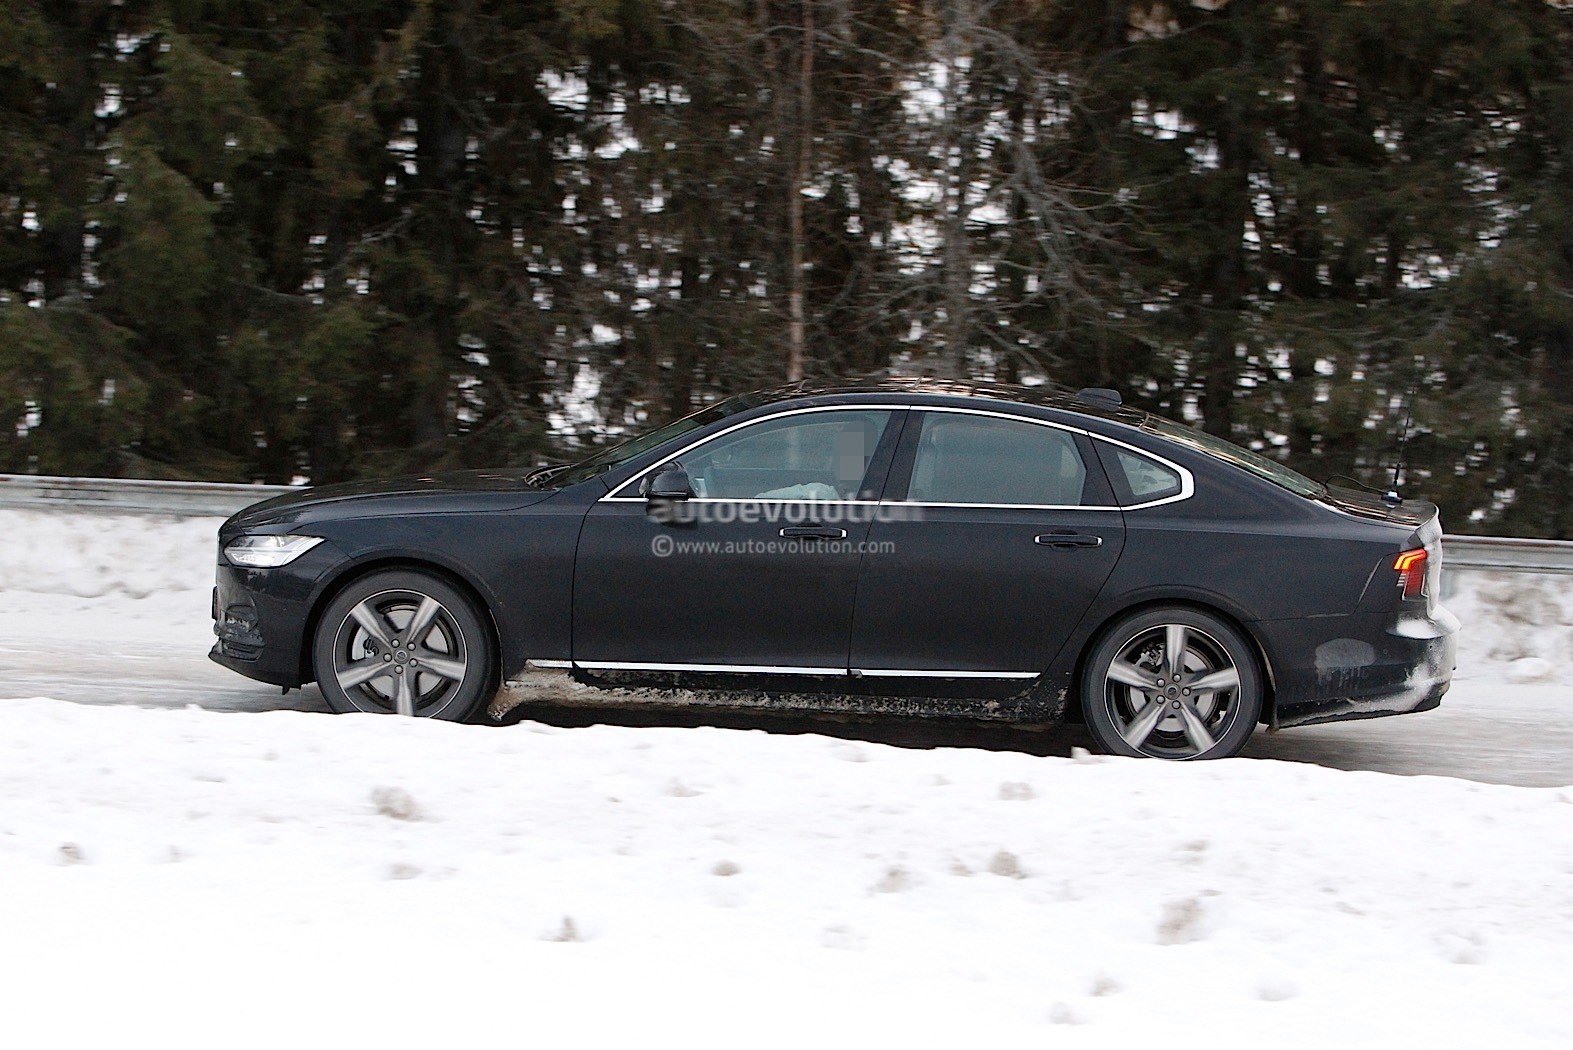 https://s1.cdn.autoevolution.com/images/news/gallery/2021-volvo-s90-and-v90-facelift-wear-useless-camouflage-winter-testing_14.jpg